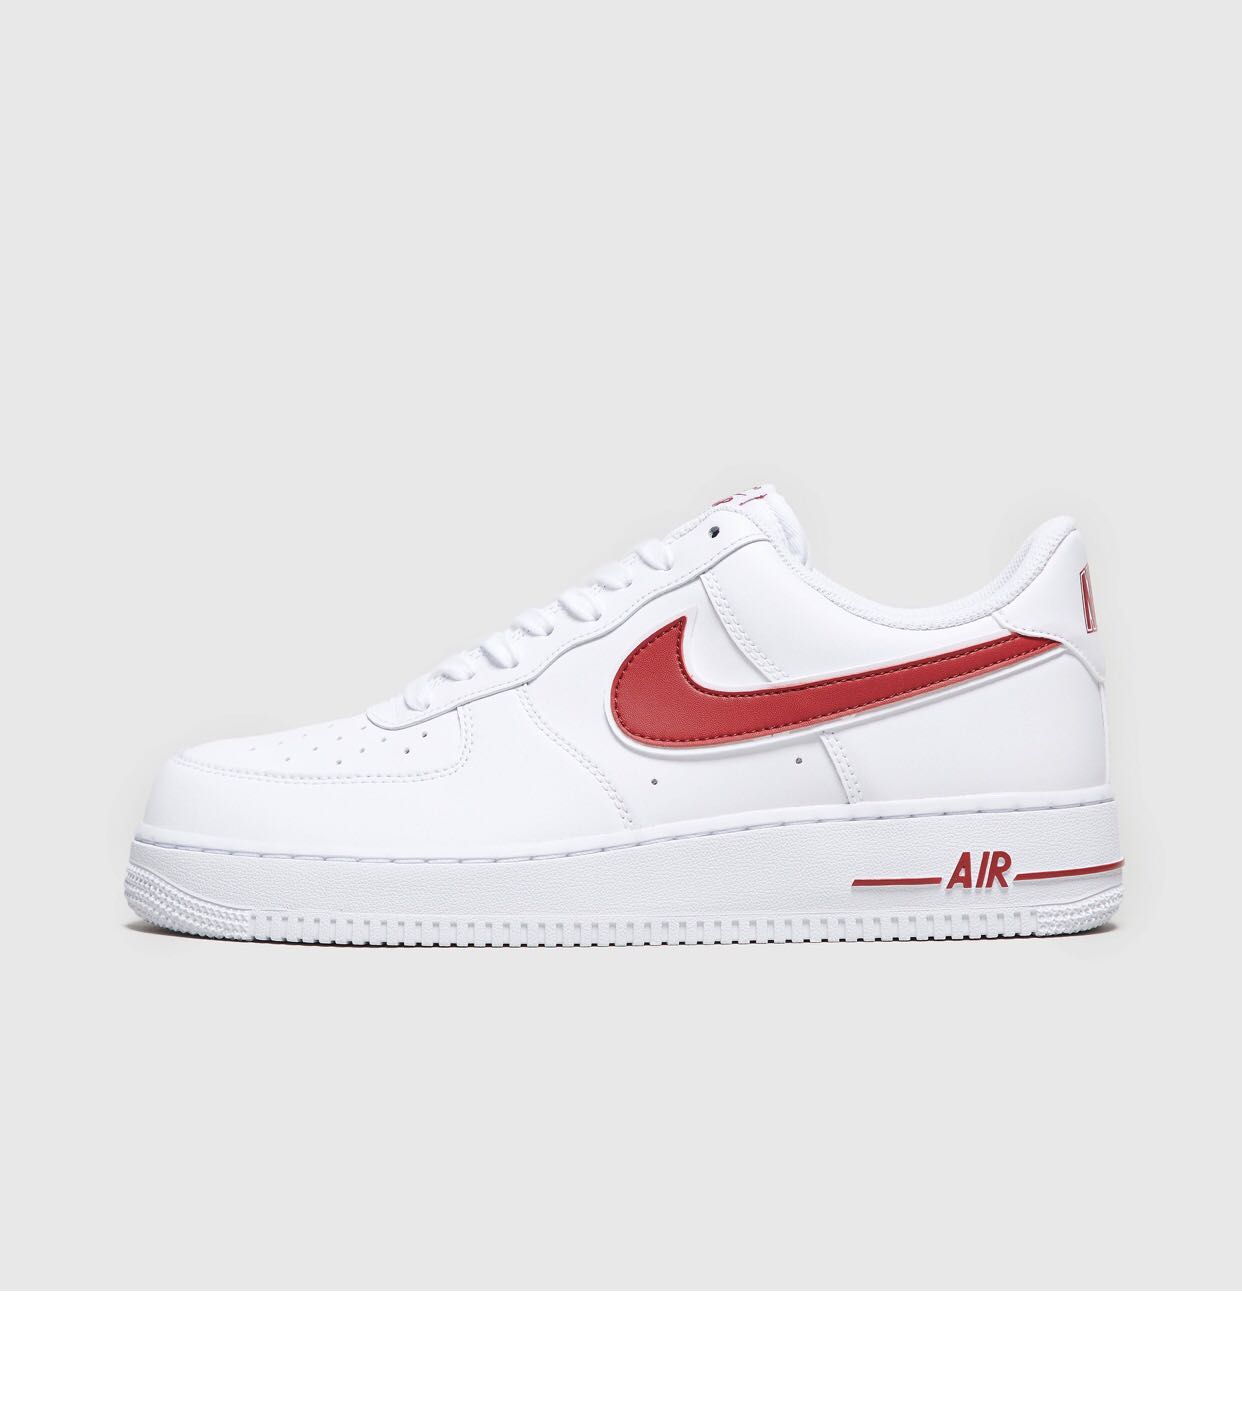 air force 1 red check mark